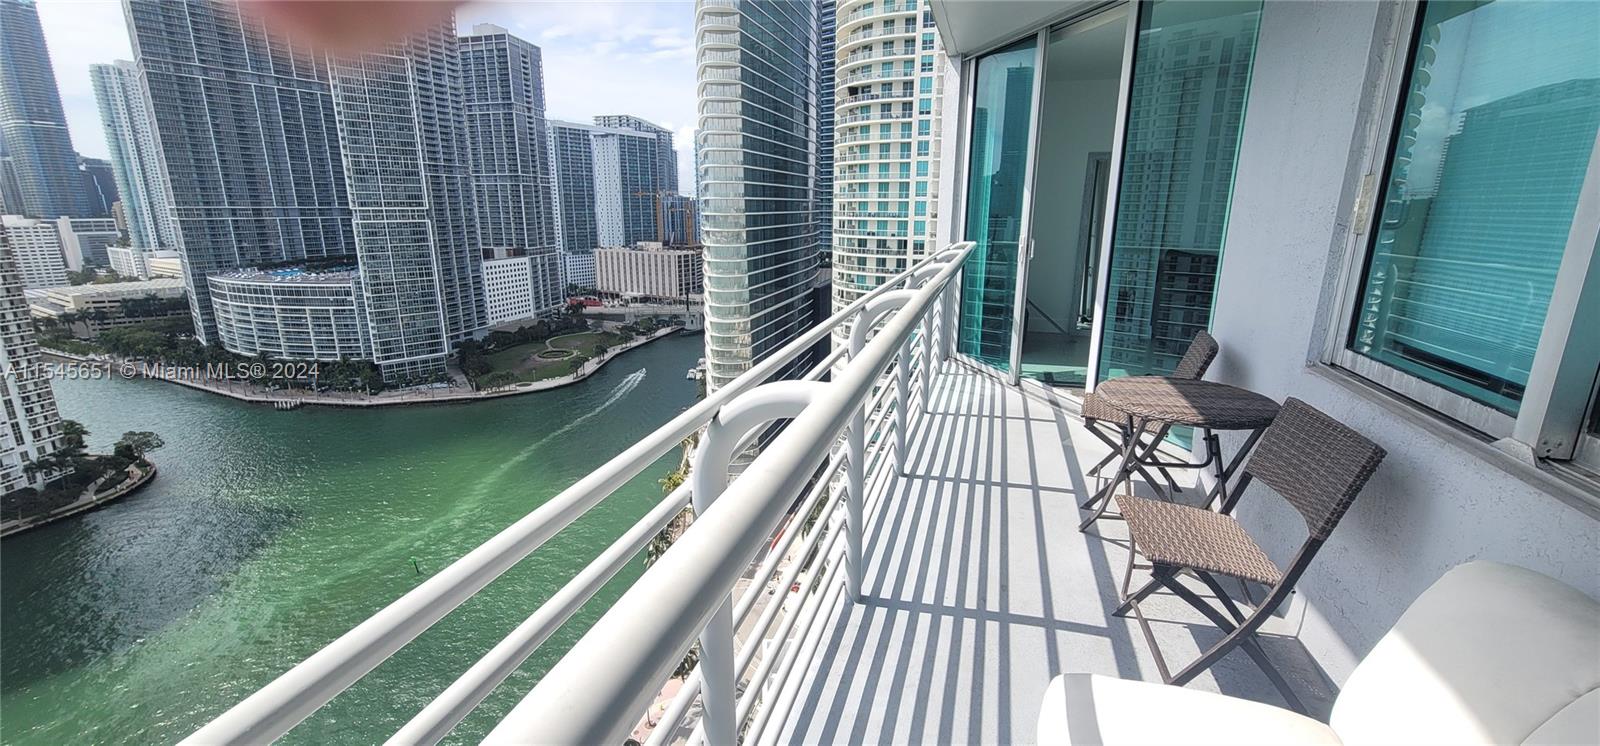 Welcome to your new home in the sky! This is an amazing unit with unobstructed views on the 26th floor from all angles - where the river meets the bay and ocean along with a backdrop of the city skyline. This unit is in pristine condition ready to be decorated with your style. One Miami is in a prime location which allows you to be in the middle of everything but at the same time you'll feel like in your own private retreat. Anything and everything is close by - world famous Miami Beach, mass transportation, shopping centers, restaurants, entertainment, airport, Bayside and much more. First class amenities includes 2 pools, hot tub, sauna, 2 gyms, lounges, conference rooms, party room, valet, security and even a small mini-store in lobby.